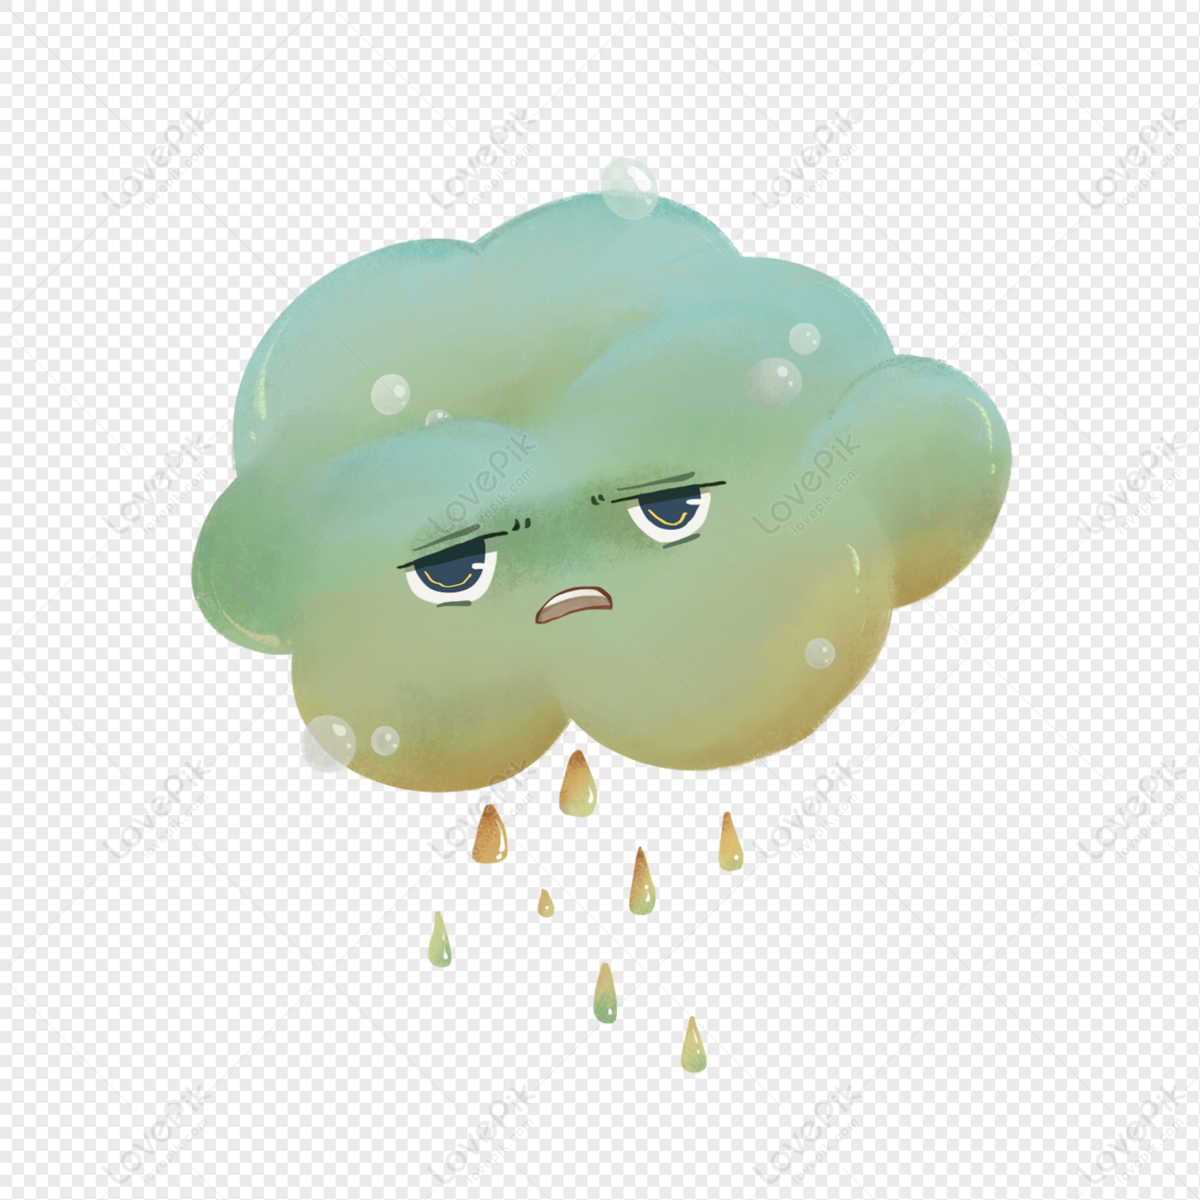 Sour Rain Cloud Rain Cartoon PNG Transparent Background And Clipart Image  For Free Download - Lovepik | 401911660